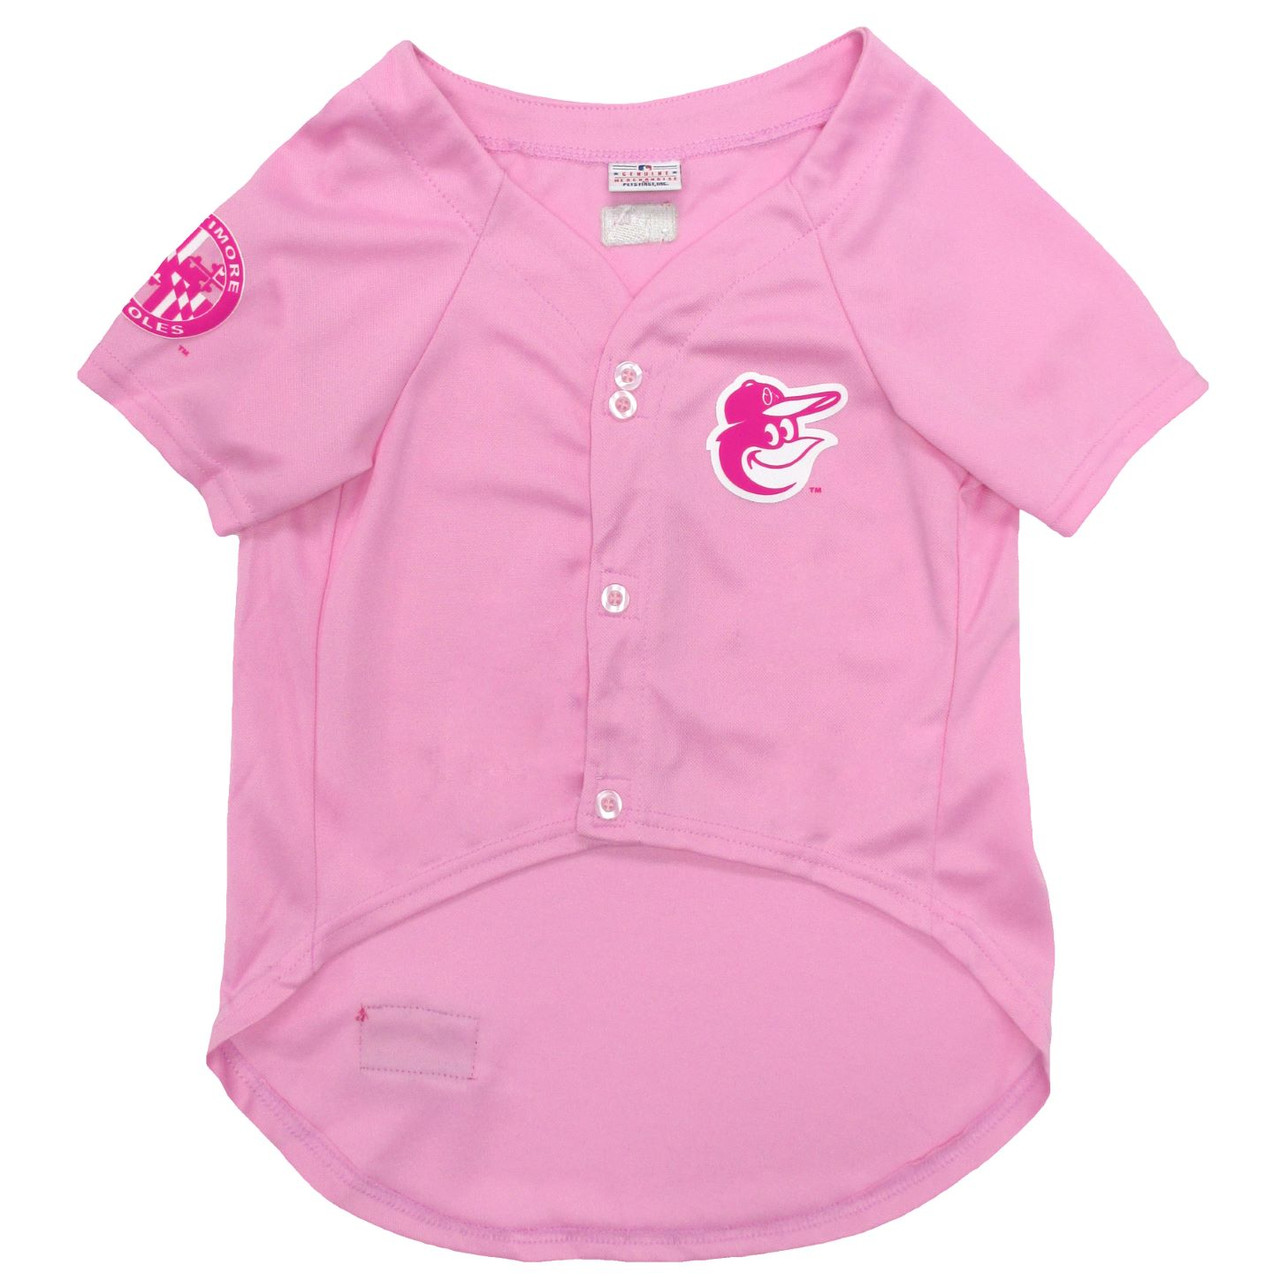 Baltimore Orioles Pink Jersey